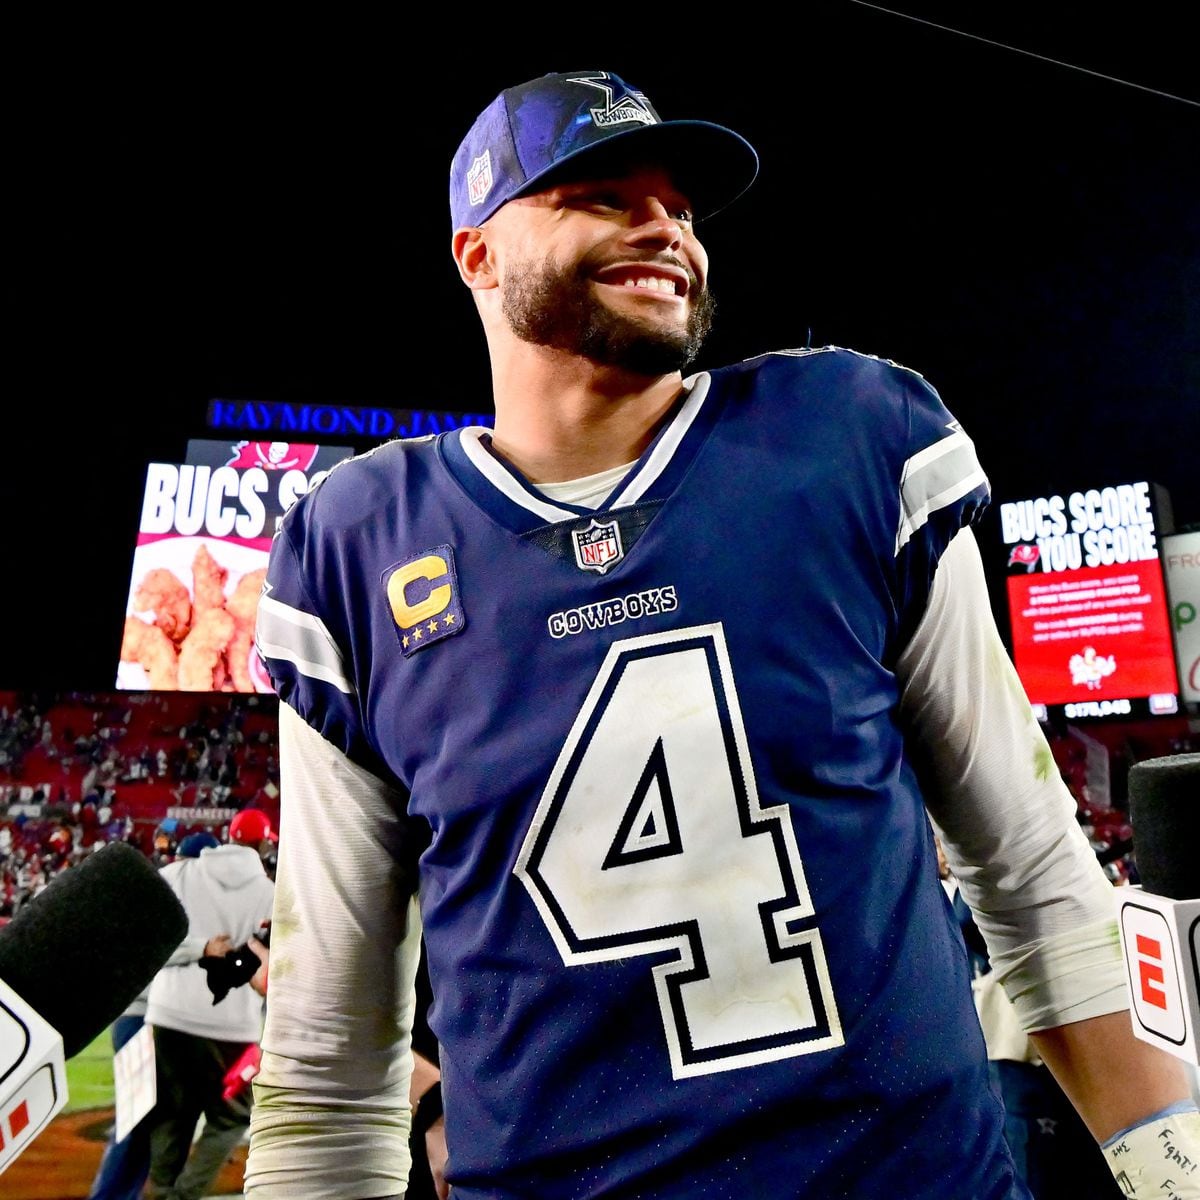 Cowboys 31-14 Buccaneers, Prescott leads Cowboys to Divisional Game,  summary: score, stats, highlights